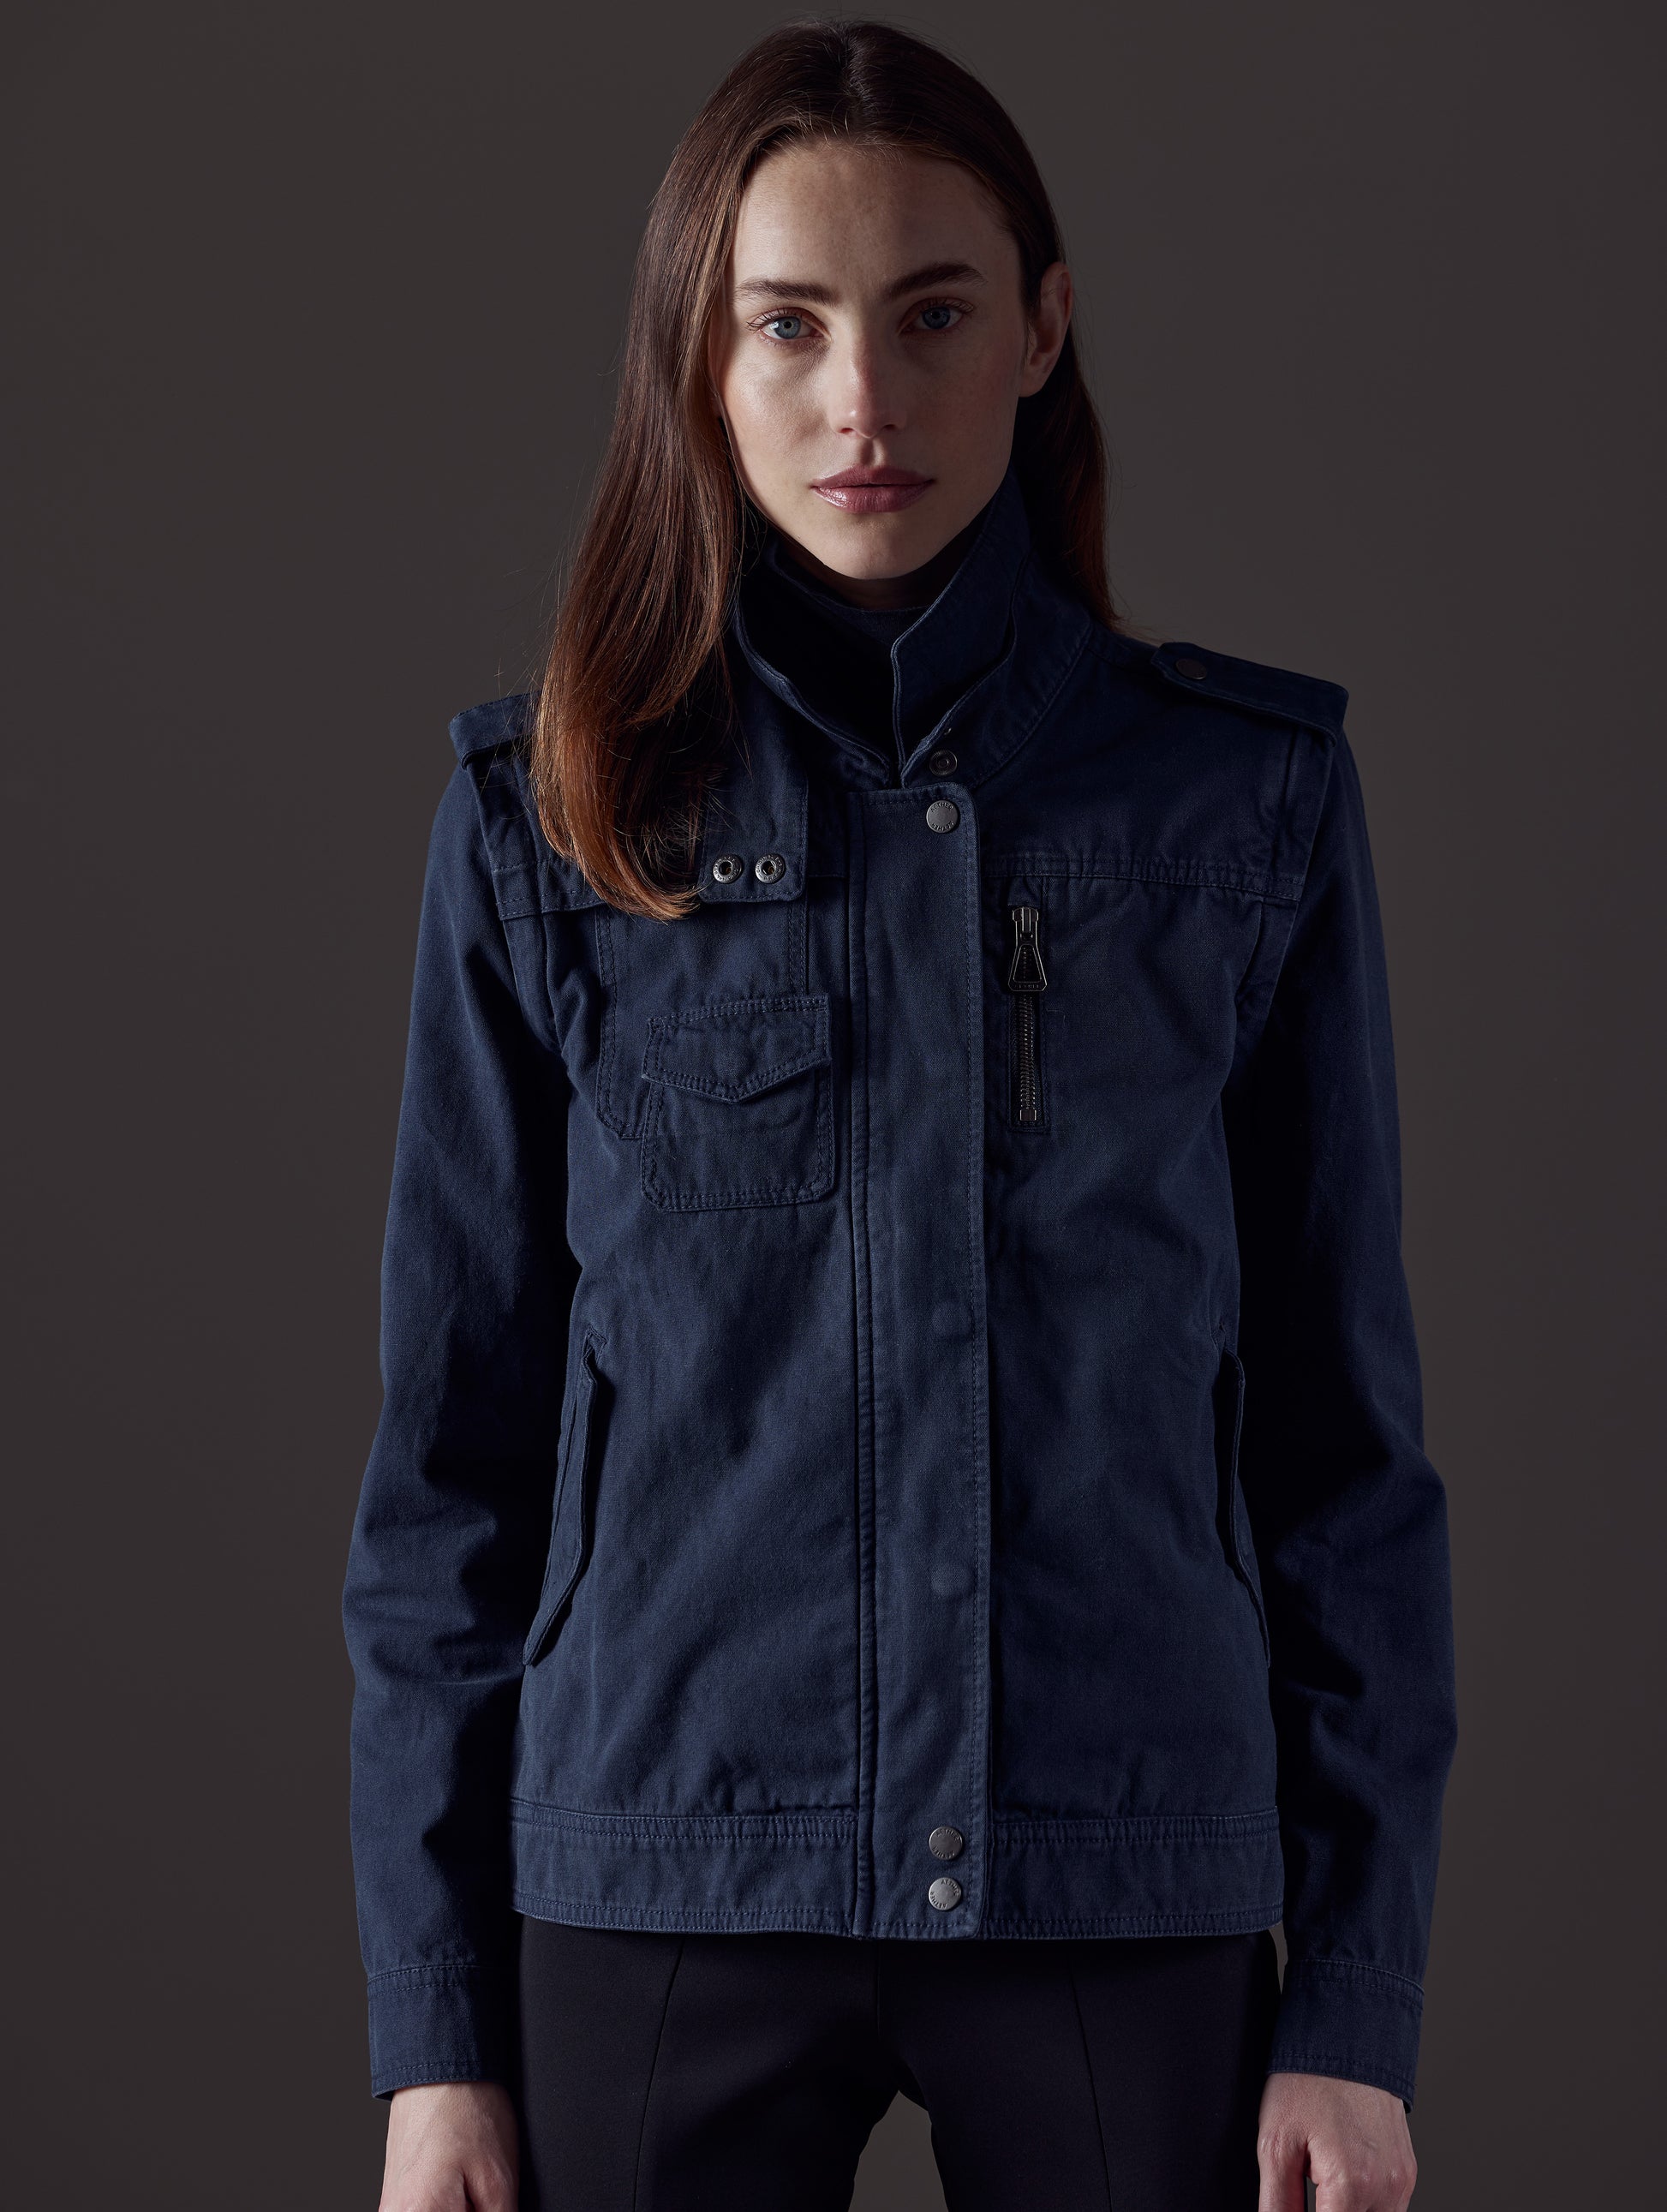 Woman wearing blue jacket from AETHER Apparel